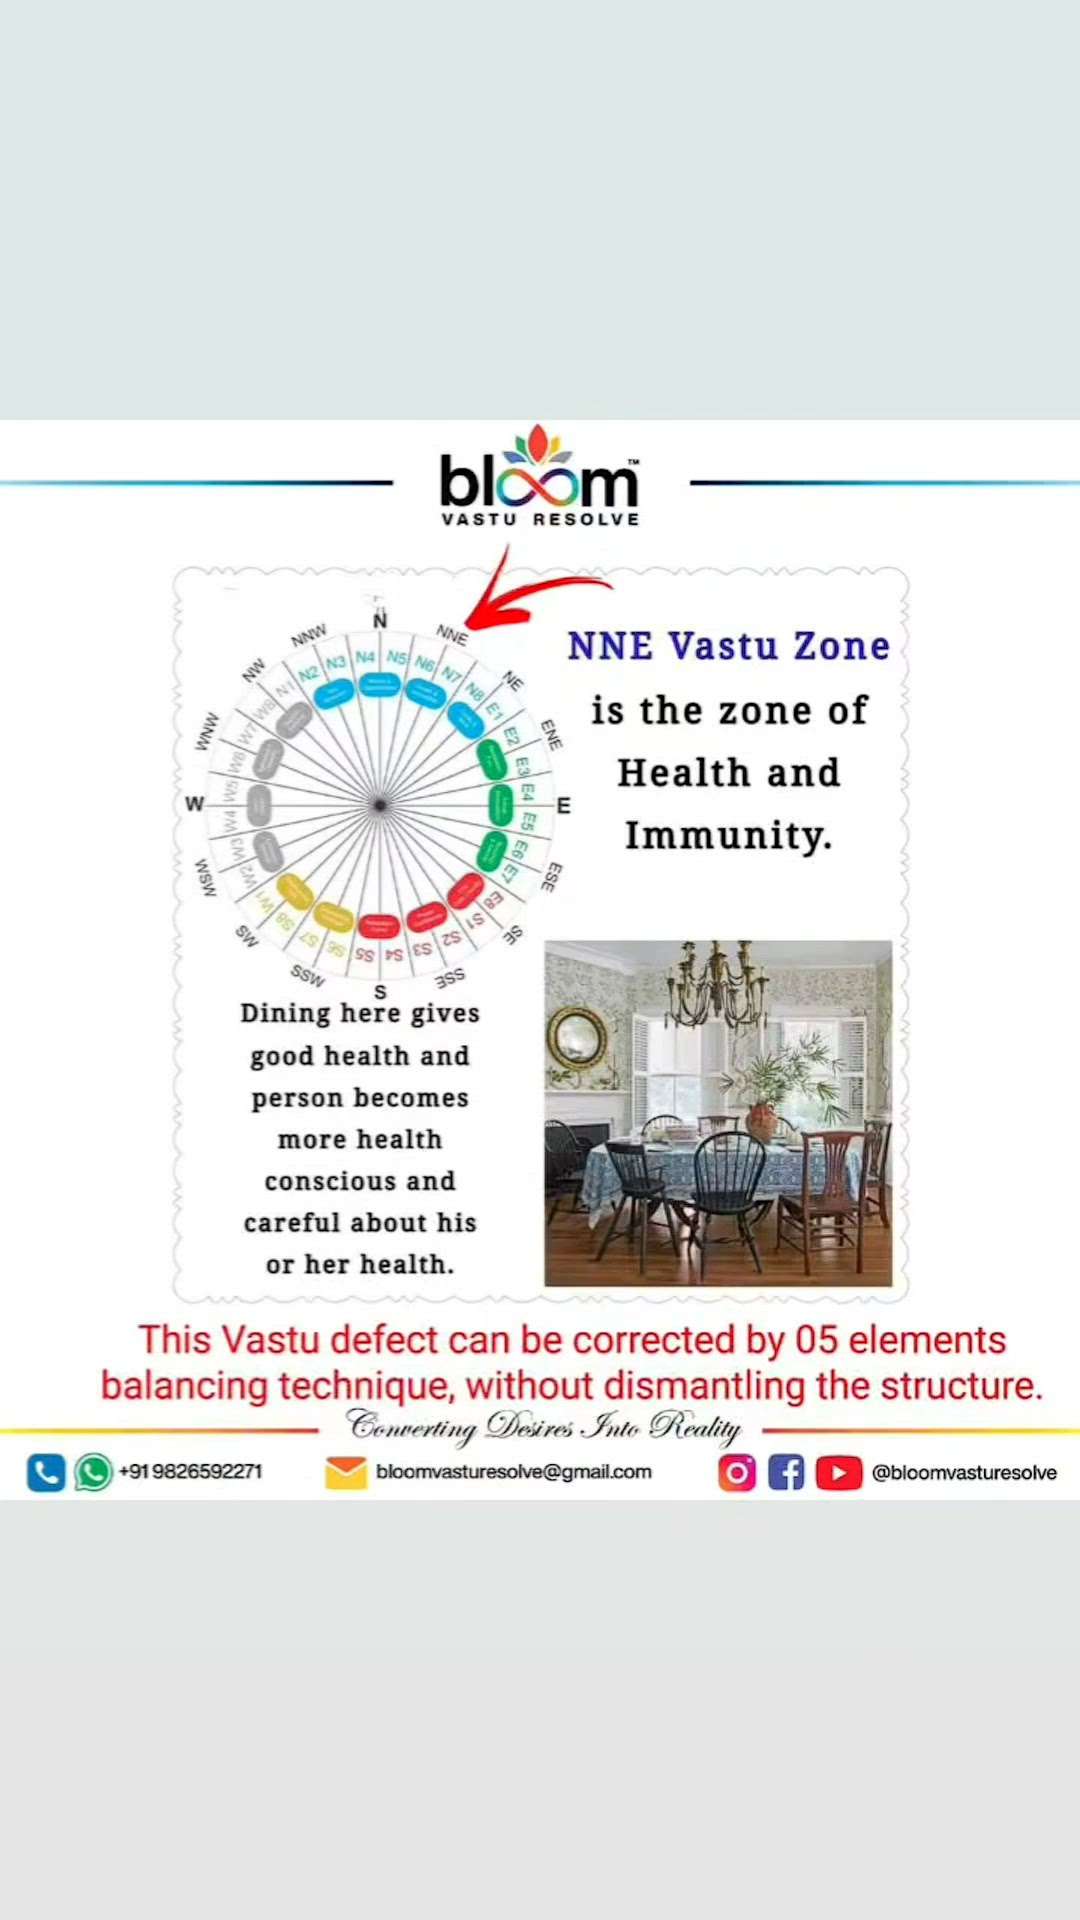 Your queries and comments are always welcome.
For more Vastu please follow @bloomvasturesolve
on YouTube, Instagram & Facebook
.
.
For personal consultation, feel free to contact certified MahaVastu Expert through
M - 9826592271
Or
bloomvasturesolve@gmail.com
#vastu #वास्तु #mahavastu #mahavastuexpert #bloomvasturesolve  #vastureels #vastulogy #vastuexpert  #vasturemedies  #vastuforhome #vastuforpeace #vastudosh #numerology #vastuforhealth #nnezone  #उत्तरपूर्वदिशा #diningtable